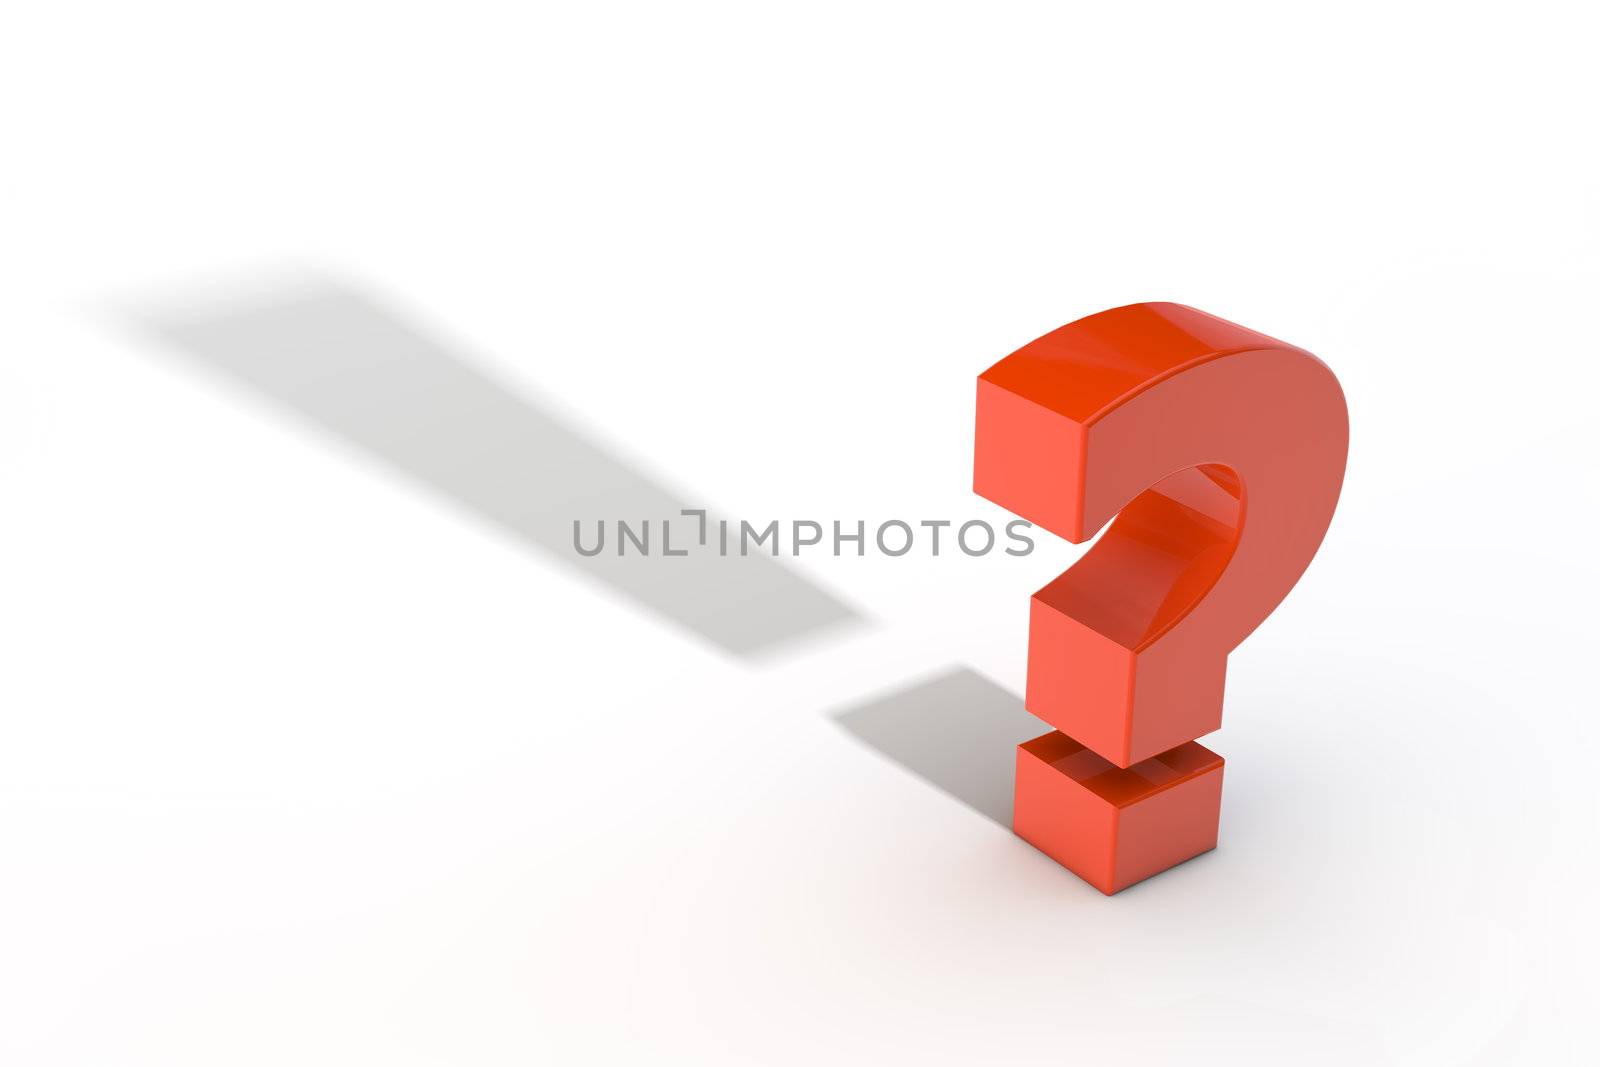 shiny red question mark symbol casts an exclamation mark shadow